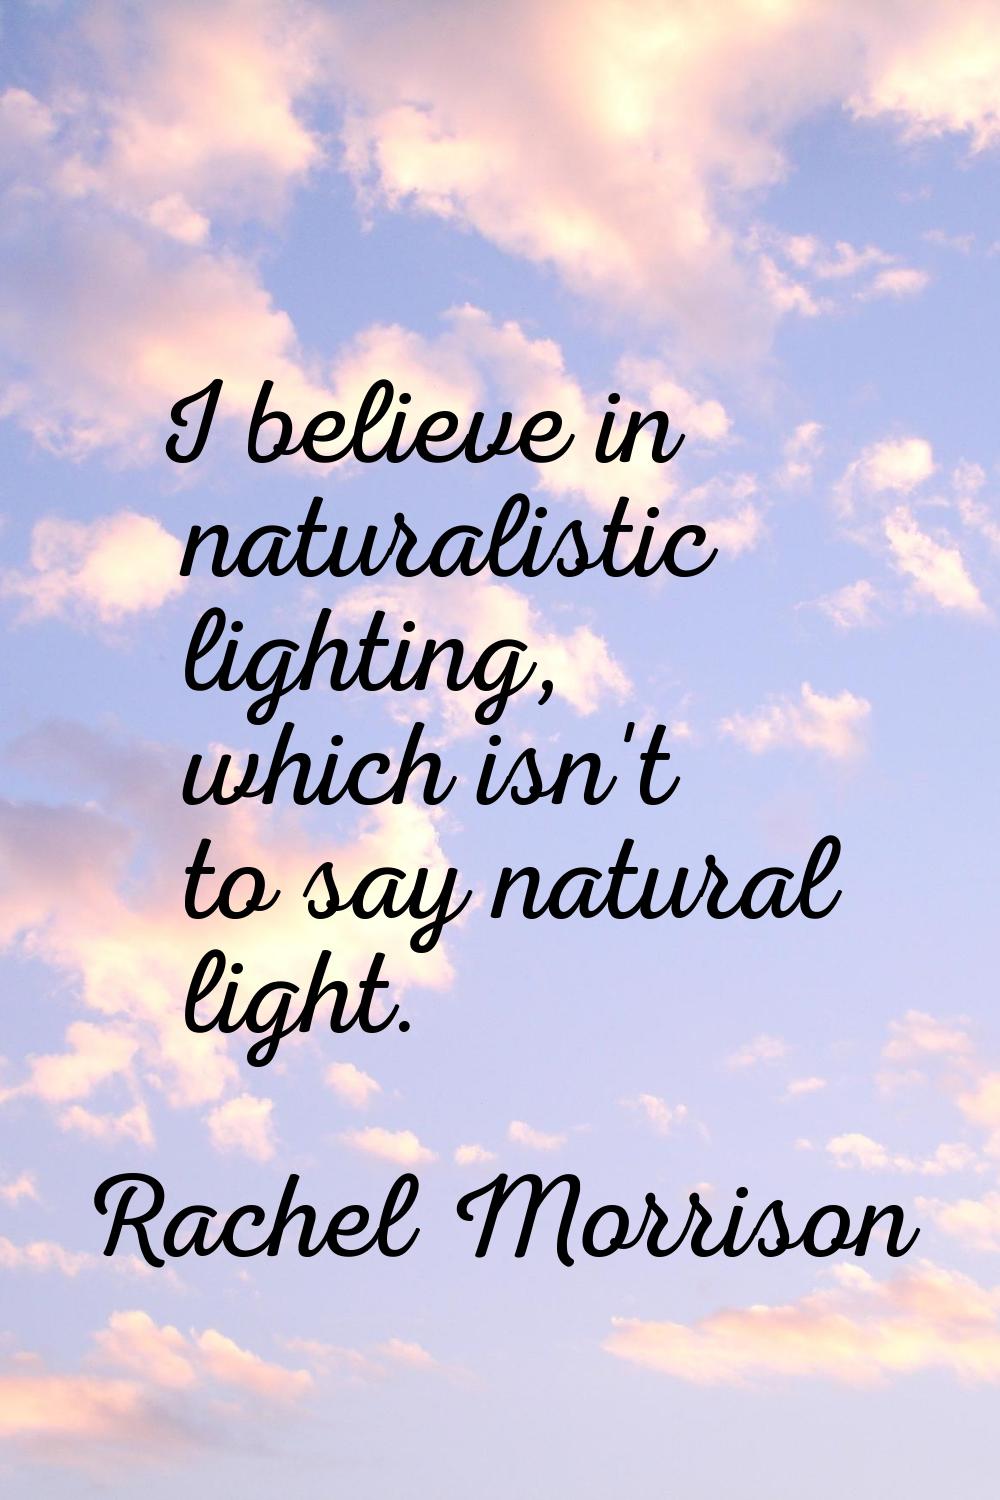 I believe in naturalistic lighting, which isn't to say natural light.